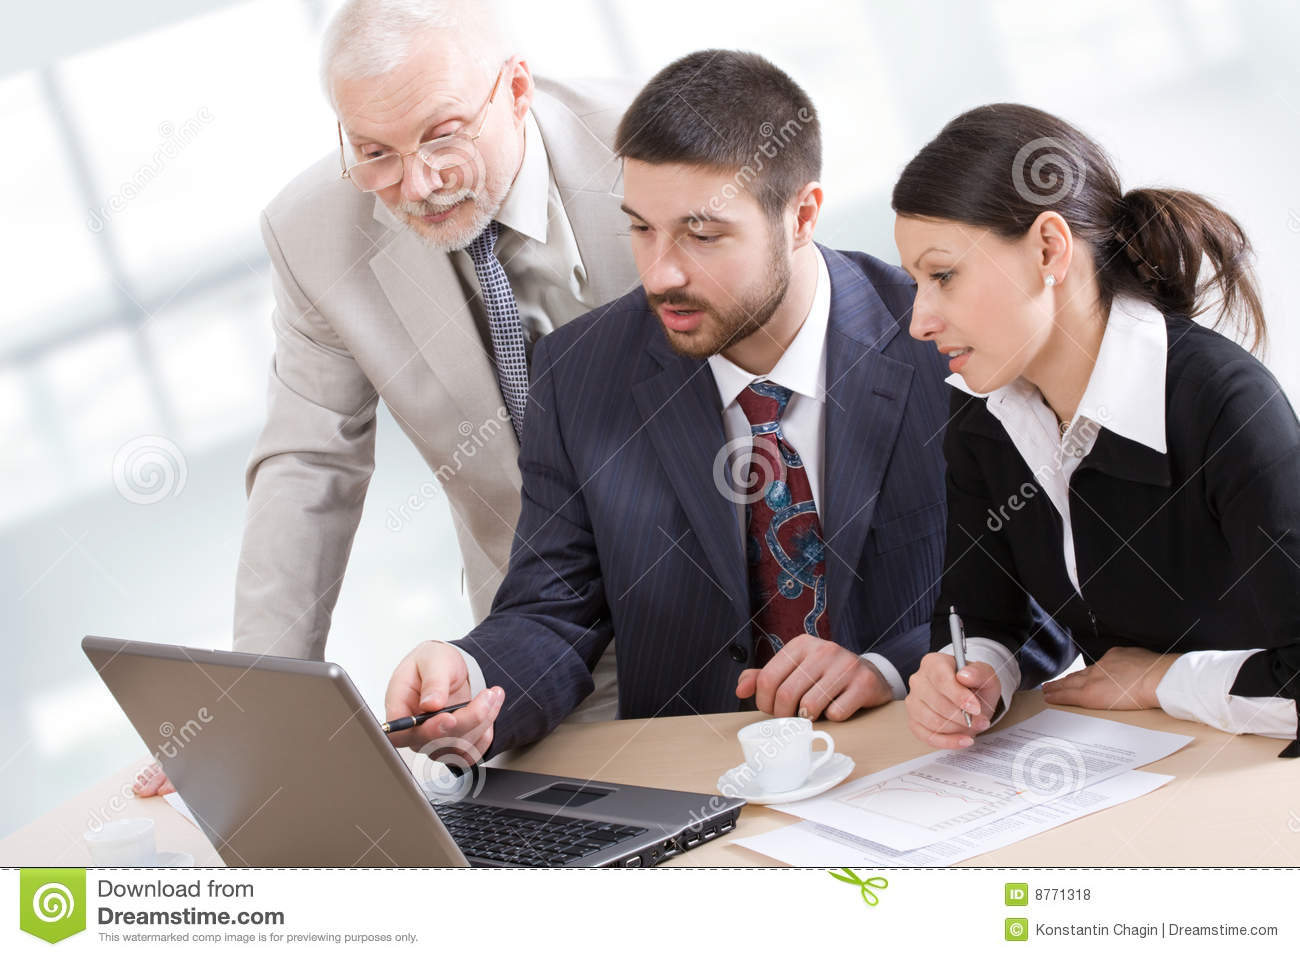 Free Stock Photos Person Working